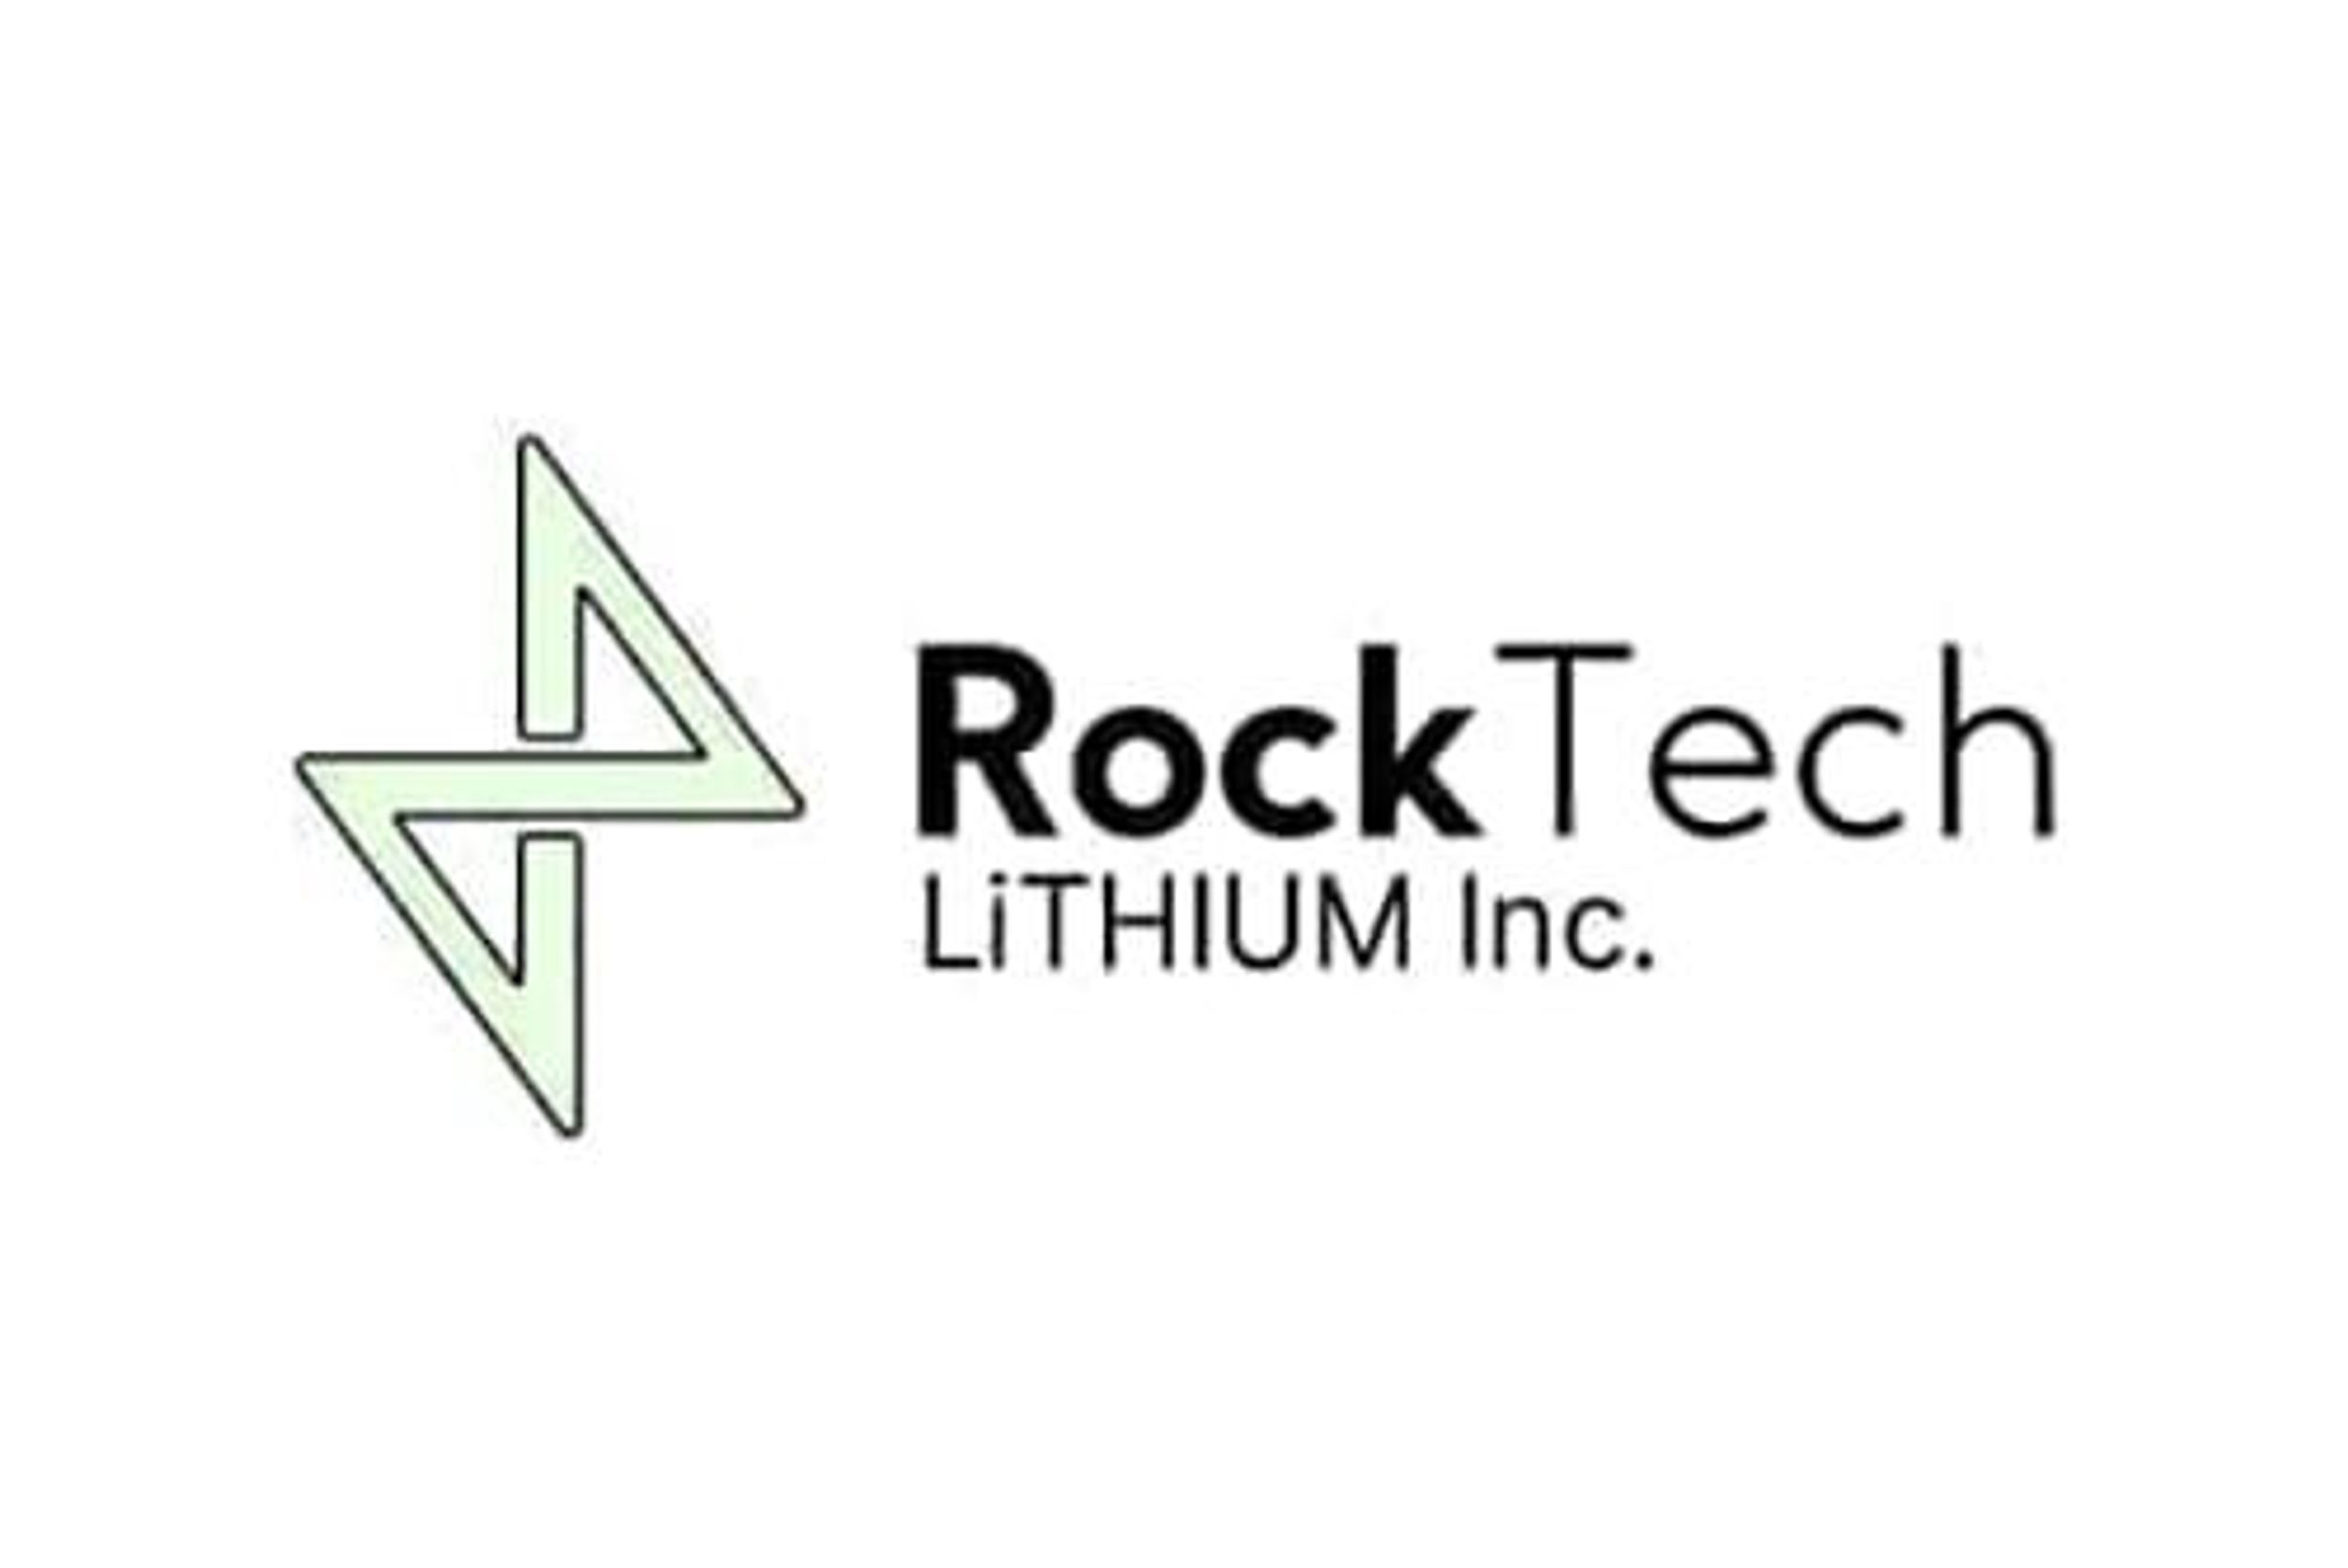 Rock Tech Lithium Announces Closing of First Tranche of Private Placement